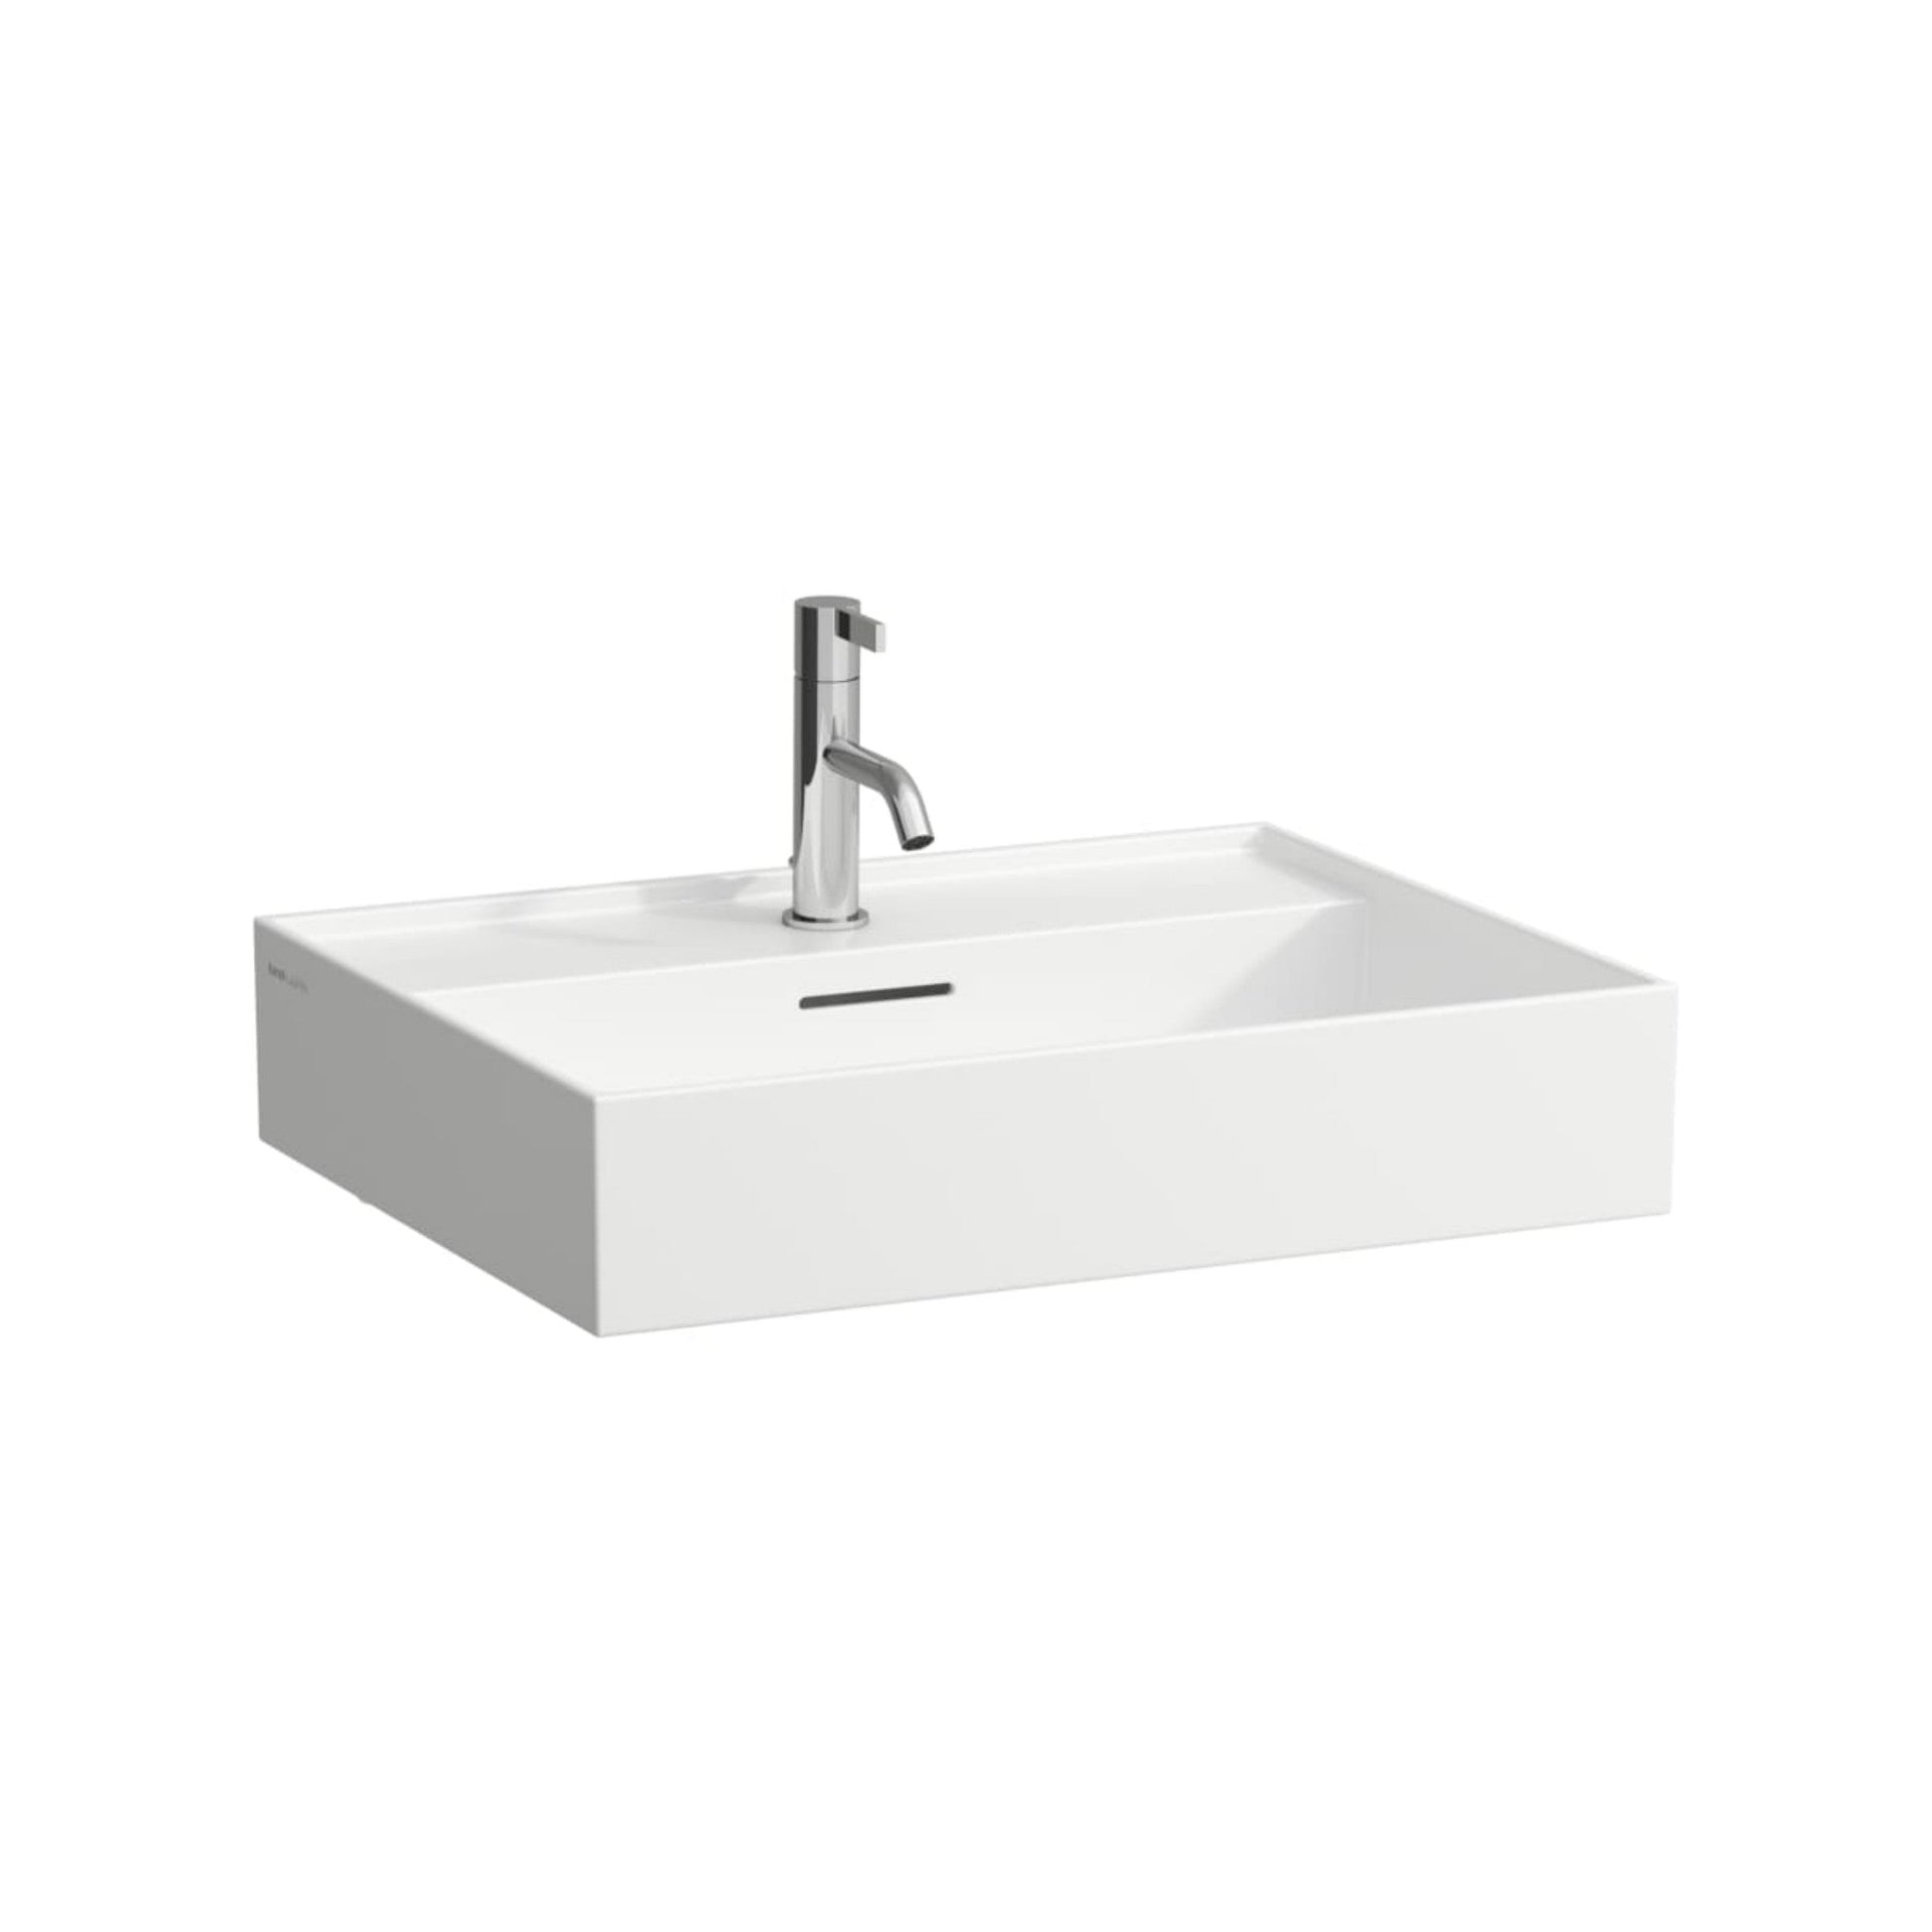 Laufen Kartell 24" x 18" White Countertop Bathroom Sink With Faucet Hole